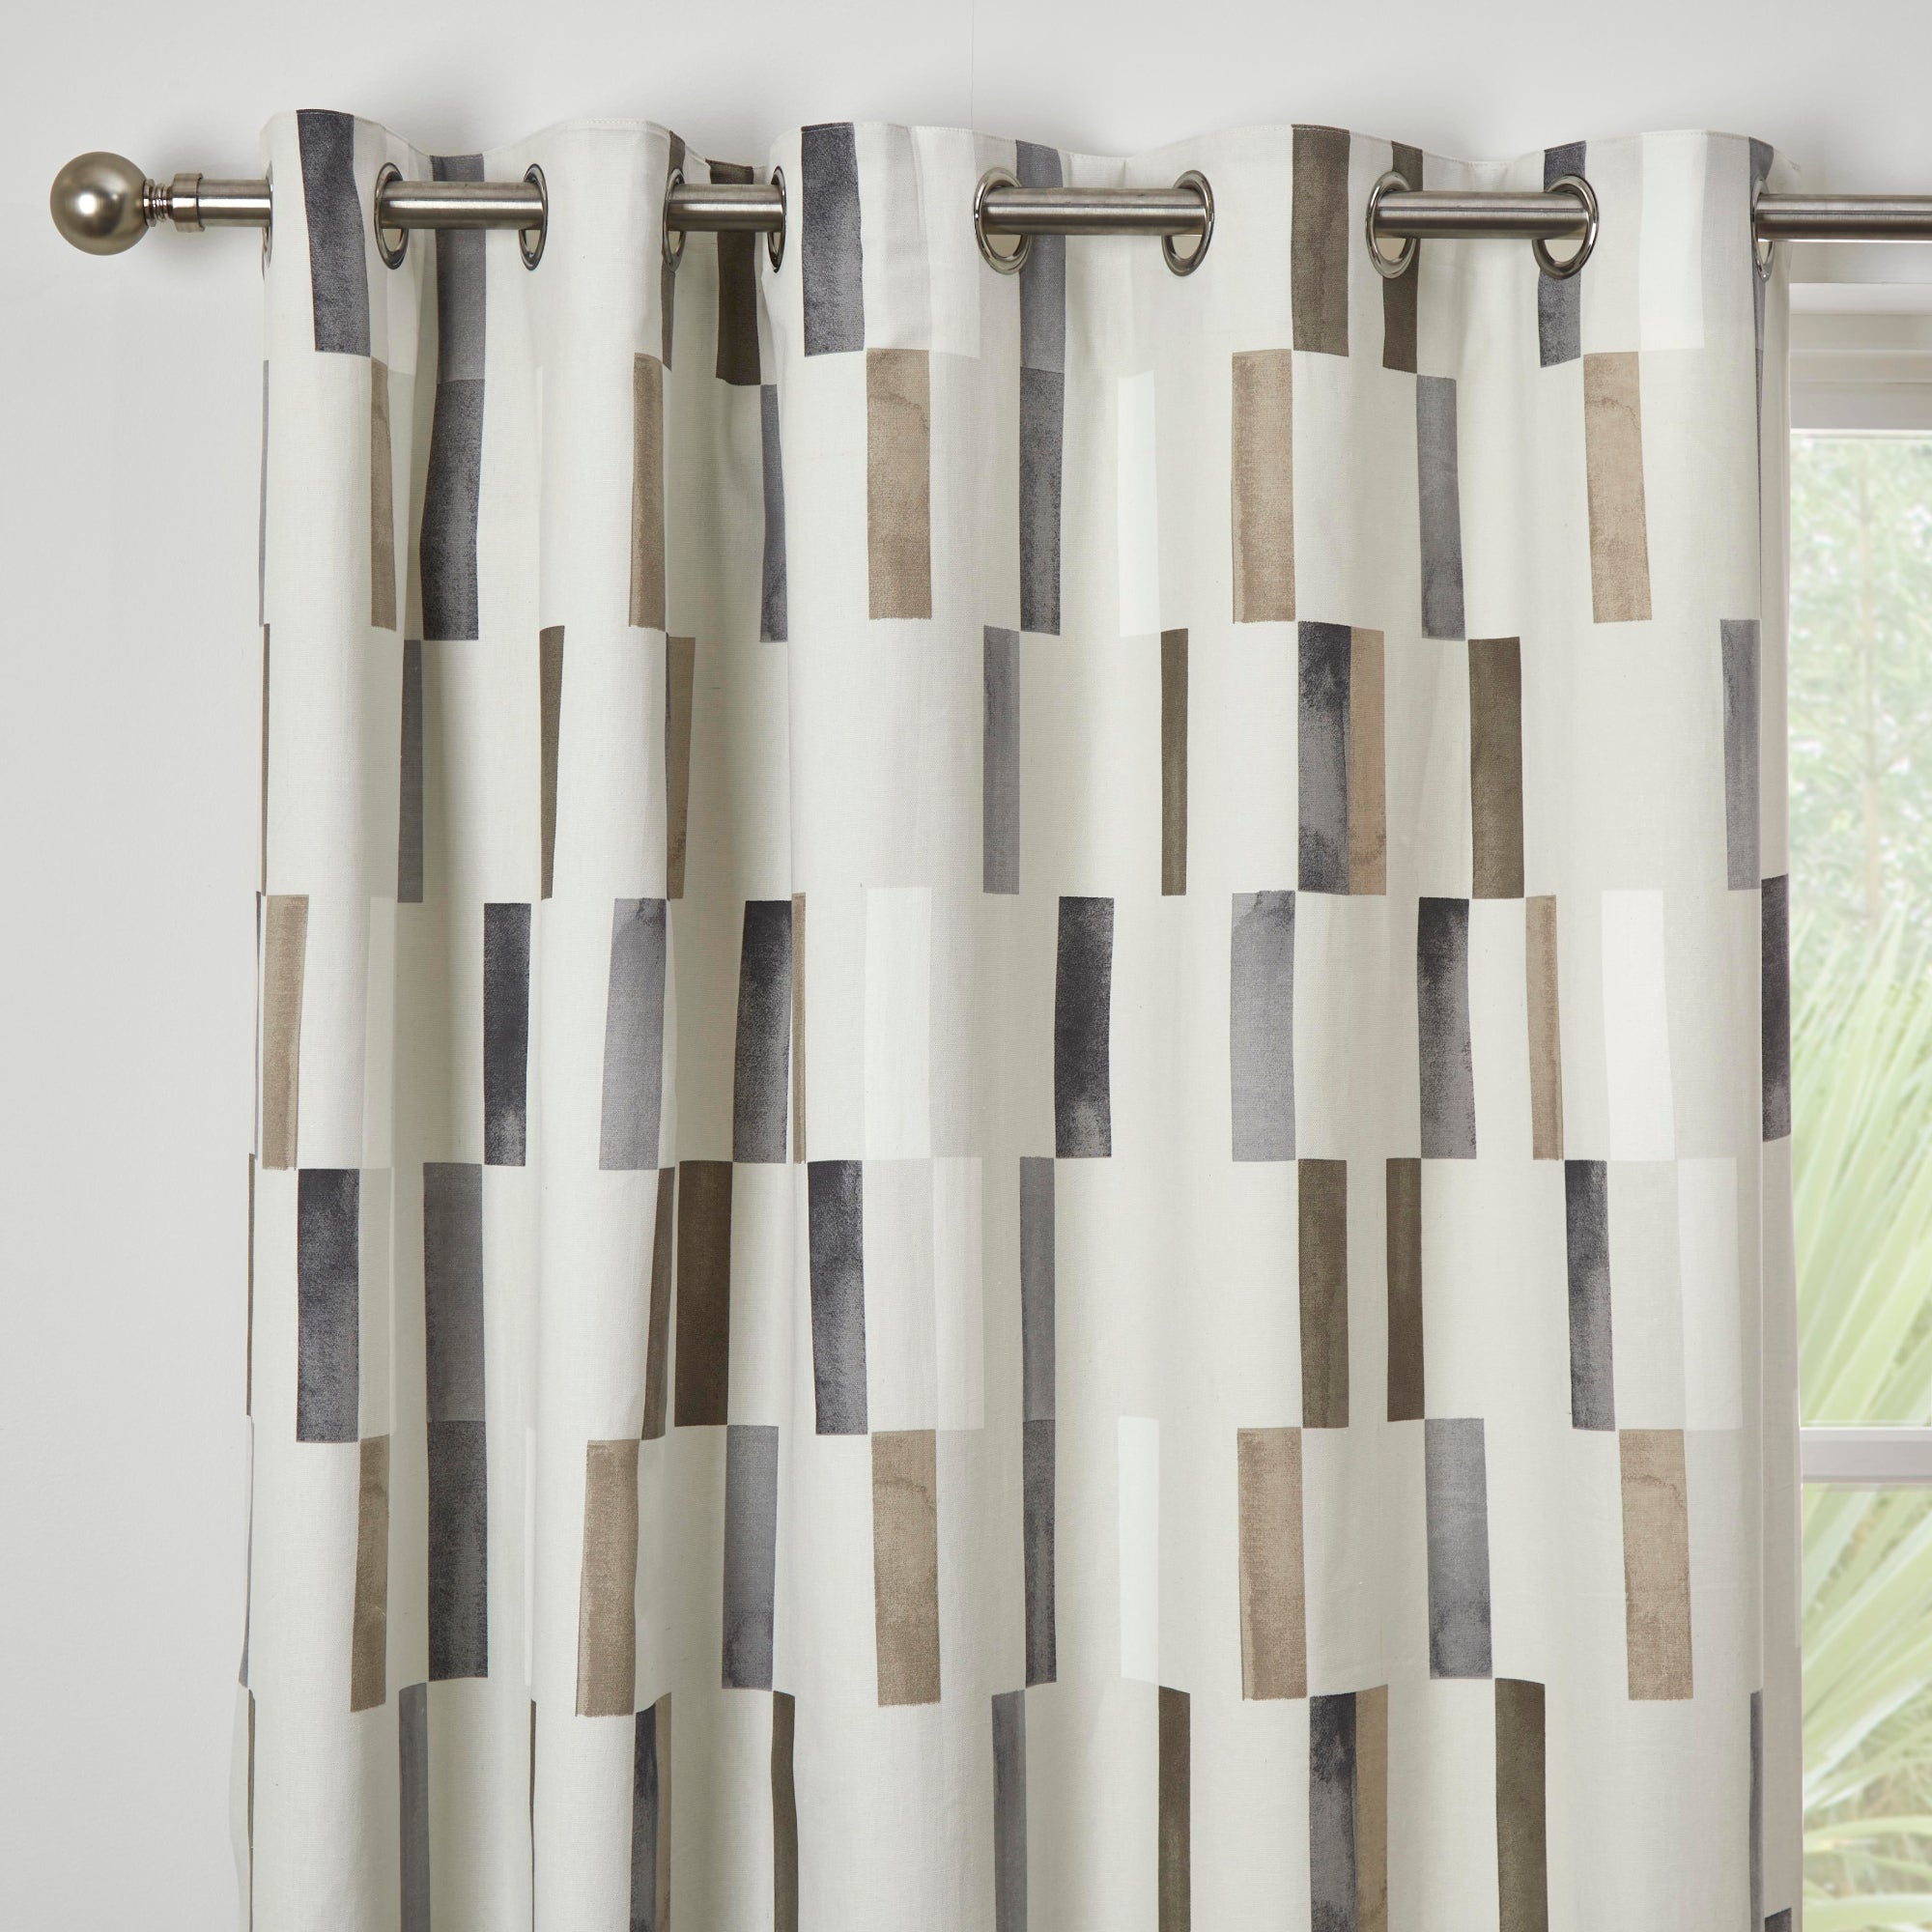 Pair of Eyelet Curtains Oakland by Fusion in Natural